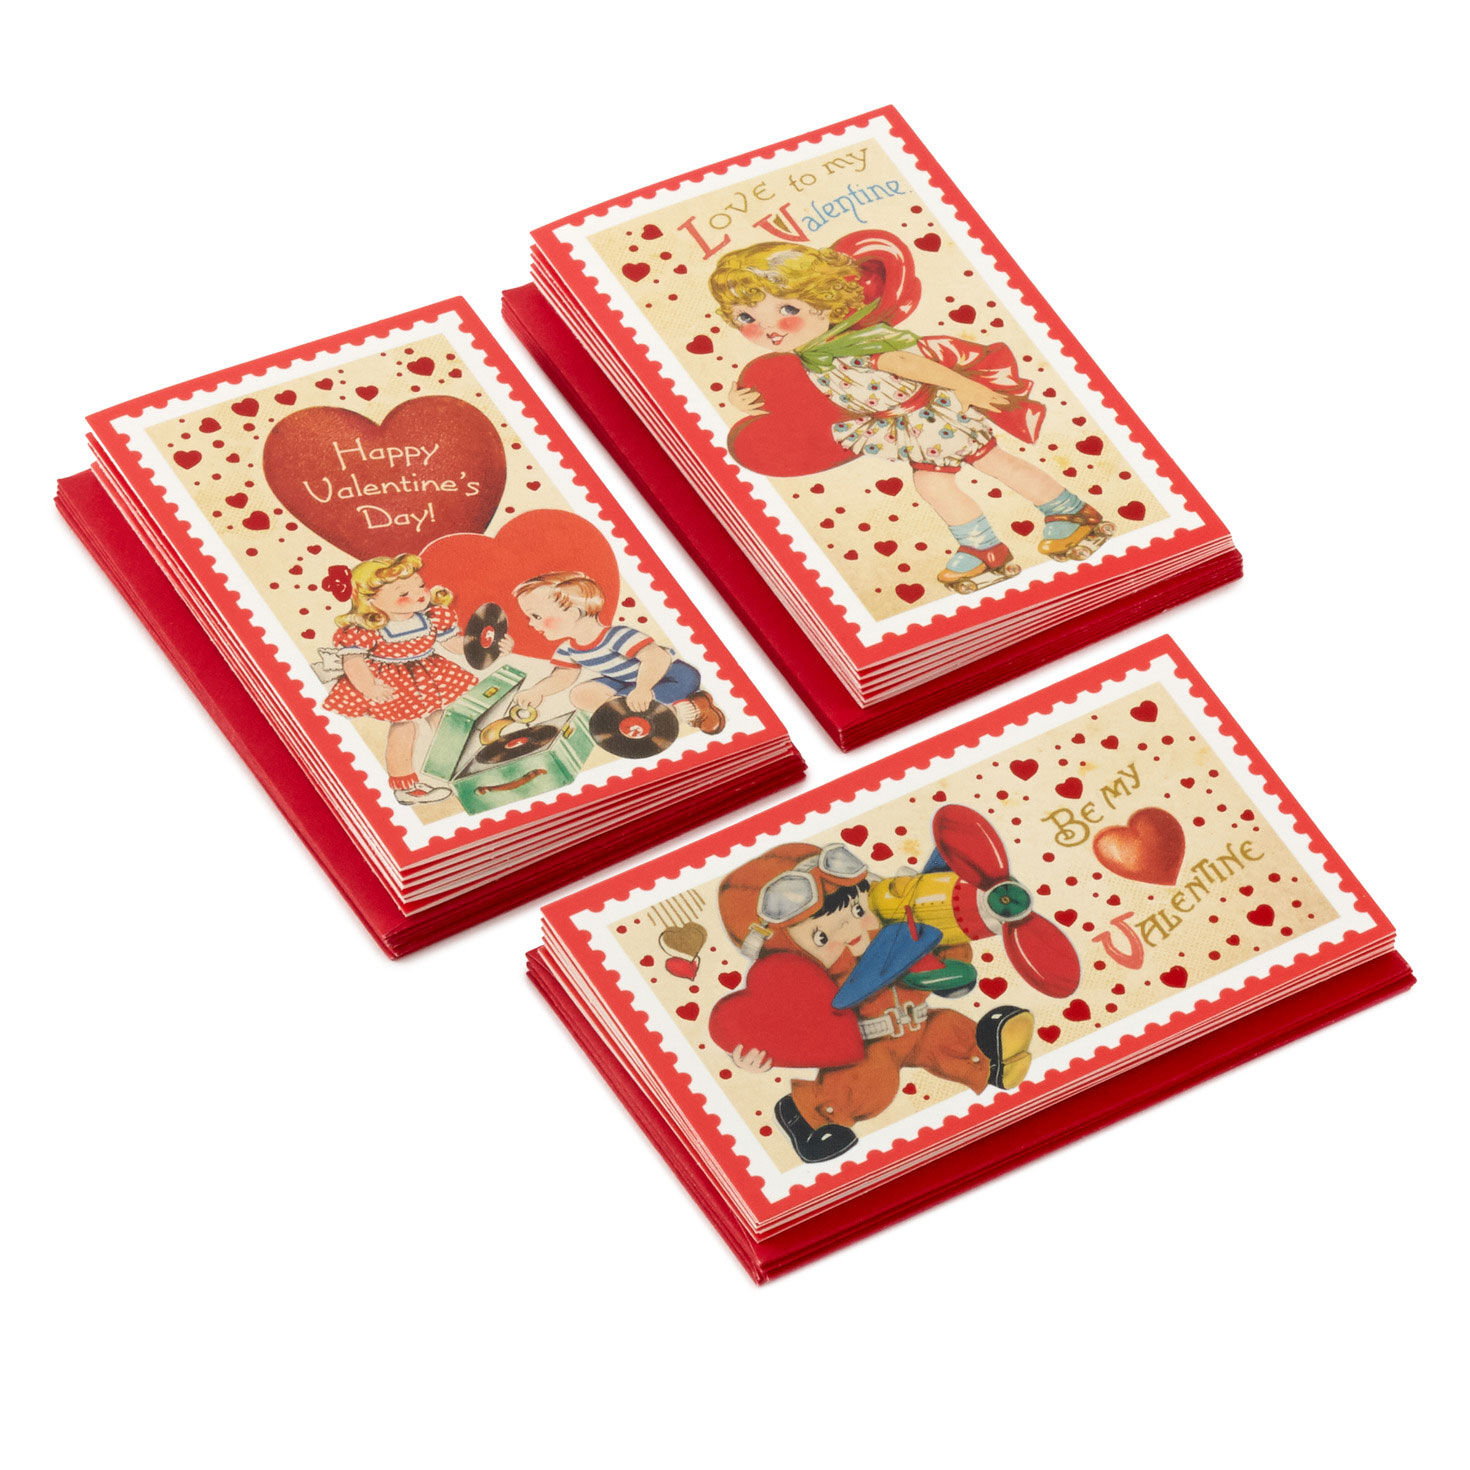  Eaasty 48 Sets Mini Vintage Valentines Day Cards with